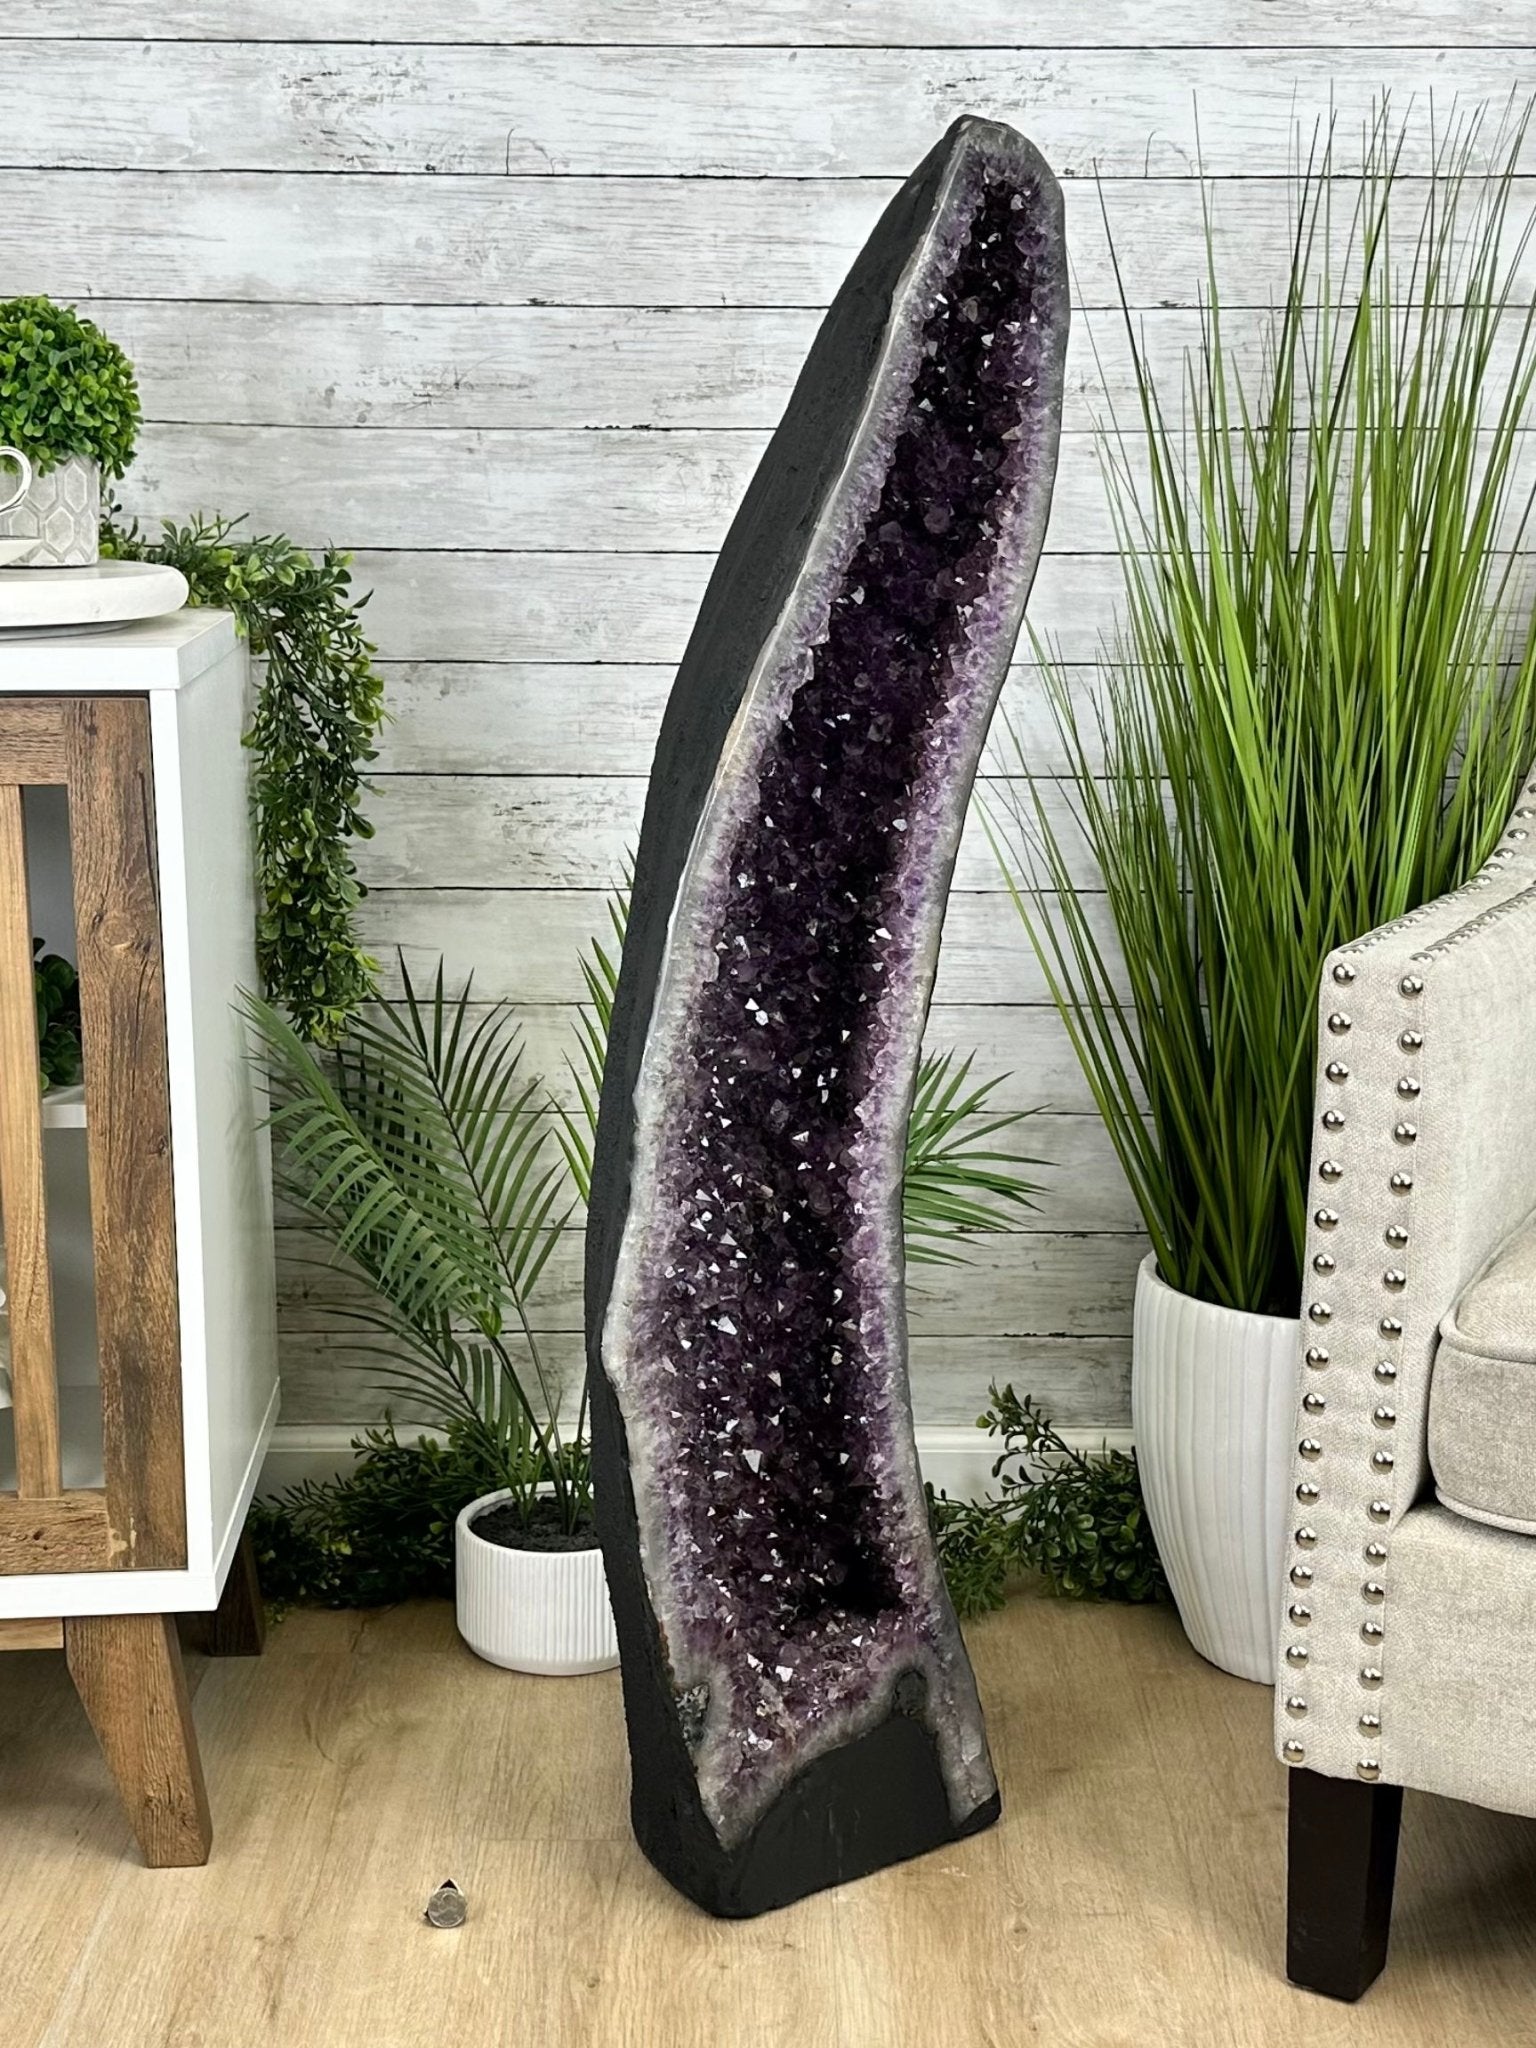 Extra Quality Brazilian Amethyst Cathedral, 103.6 lbs & 43" Tall, Model #5601-1212 by Brazil Gems - Brazil GemsBrazil GemsExtra Quality Brazilian Amethyst Cathedral, 103.6 lbs & 43" Tall, Model #5601-1212 by Brazil GemsCathedrals5601-1212